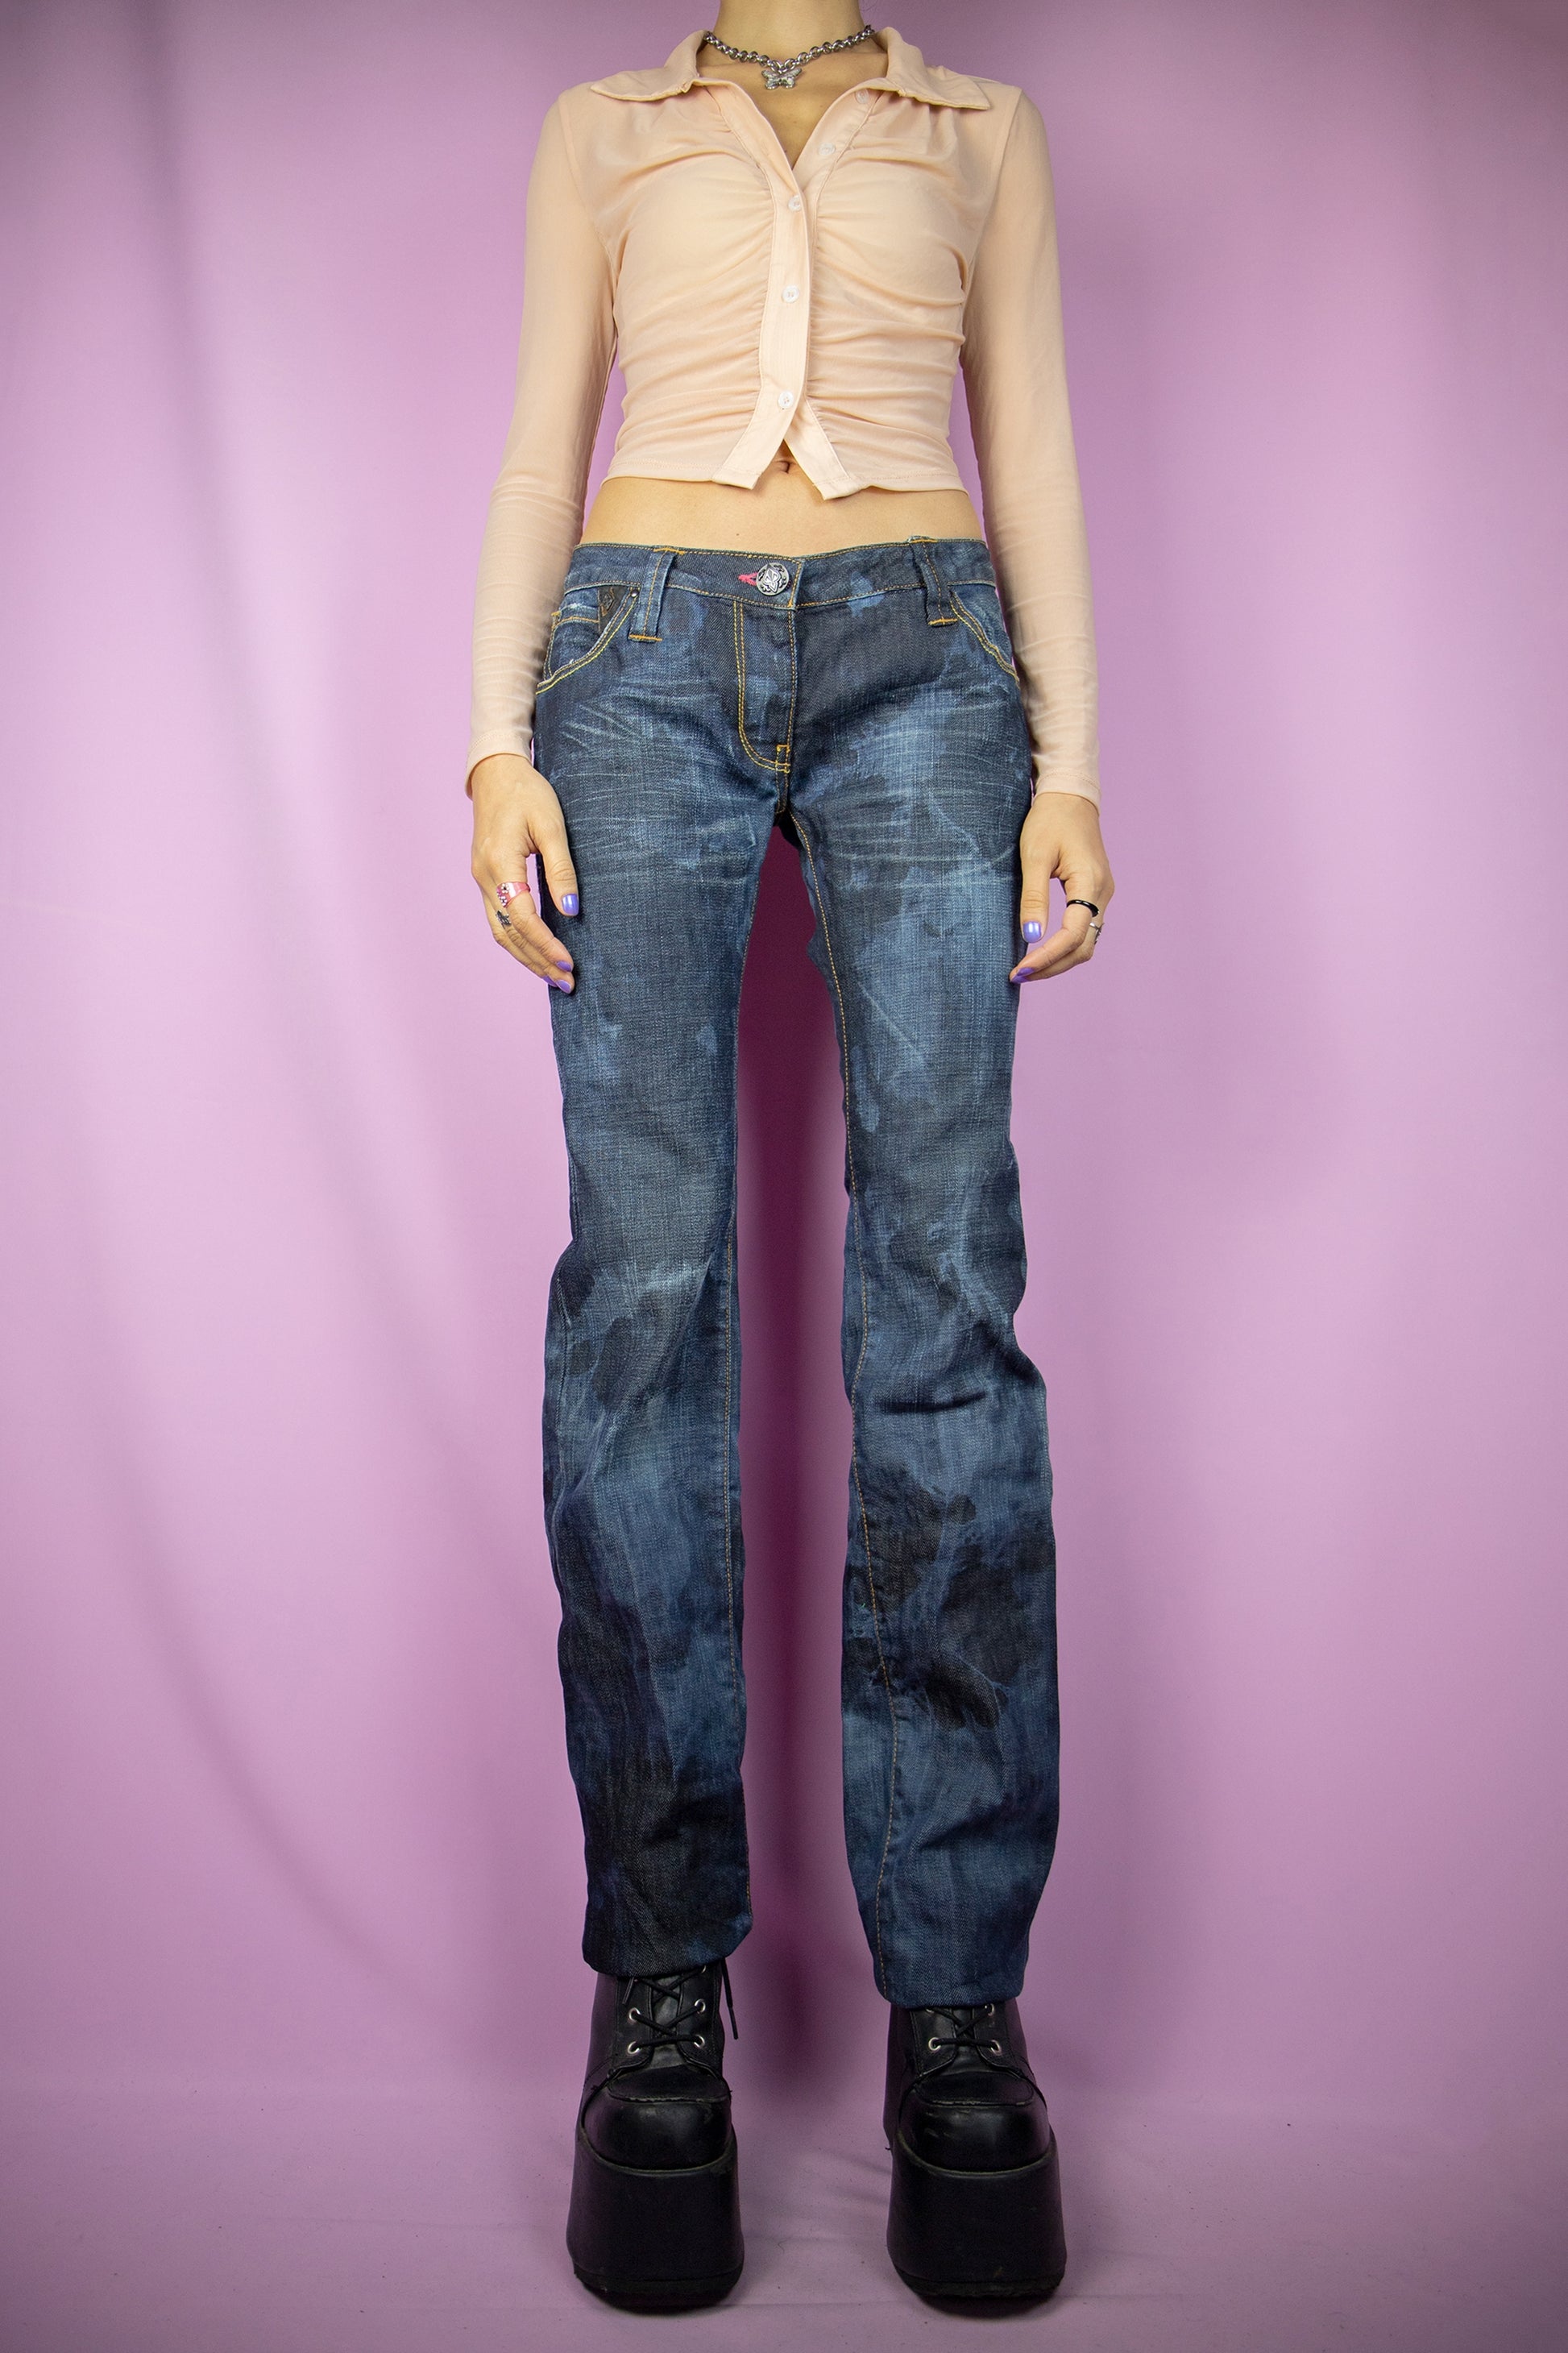 The Y2K Low Rise Bleach Jeans are vintage tie-dye bleached straight pants with pockets, a raw hem, and a subtle stretch. Cyber grunge 2000s dark denim pants.